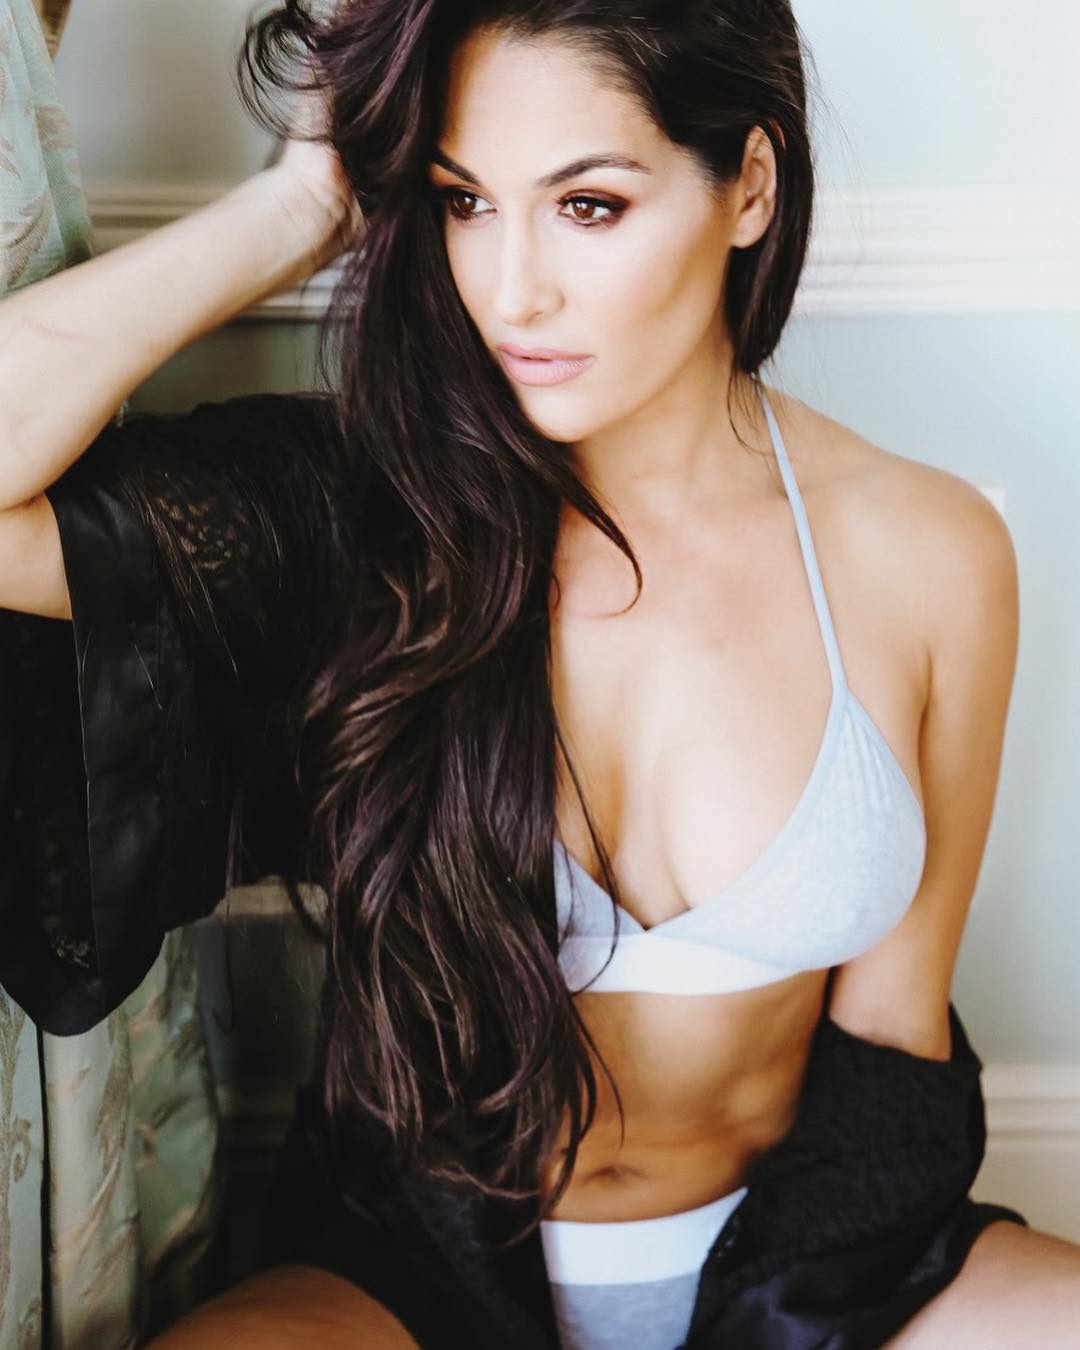 48 Hottest Nikki Bella Bikini Pictures Expose This WWE Diva’s Sexy Body | Best Of Comic Books